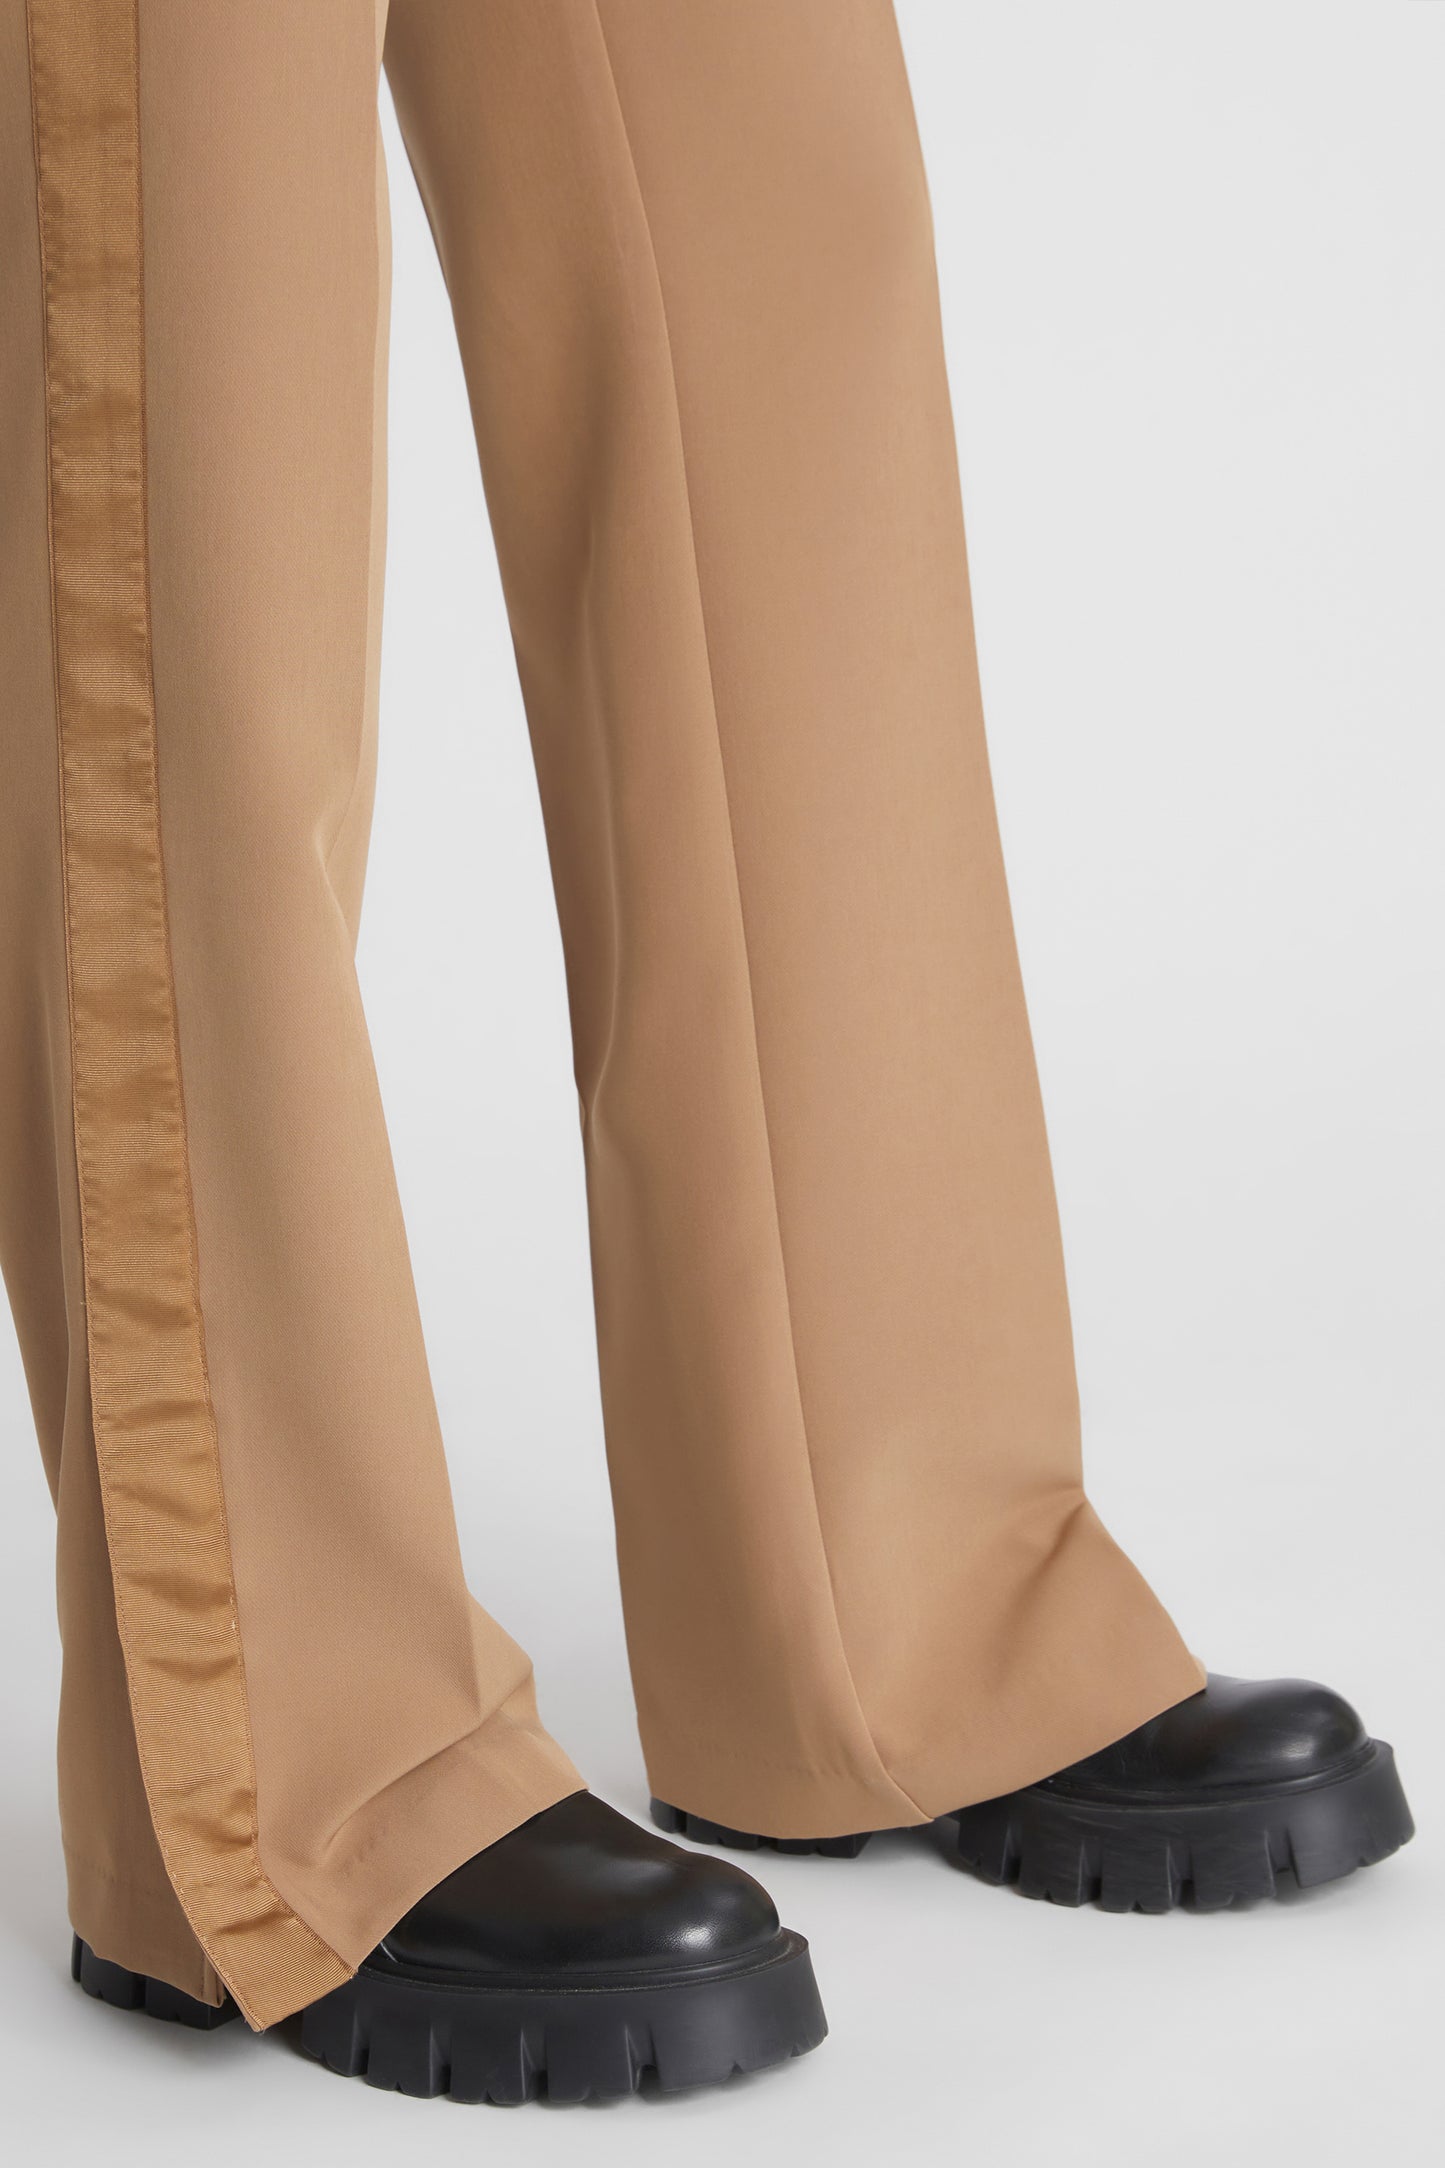 Palazzo trousers with side band detail